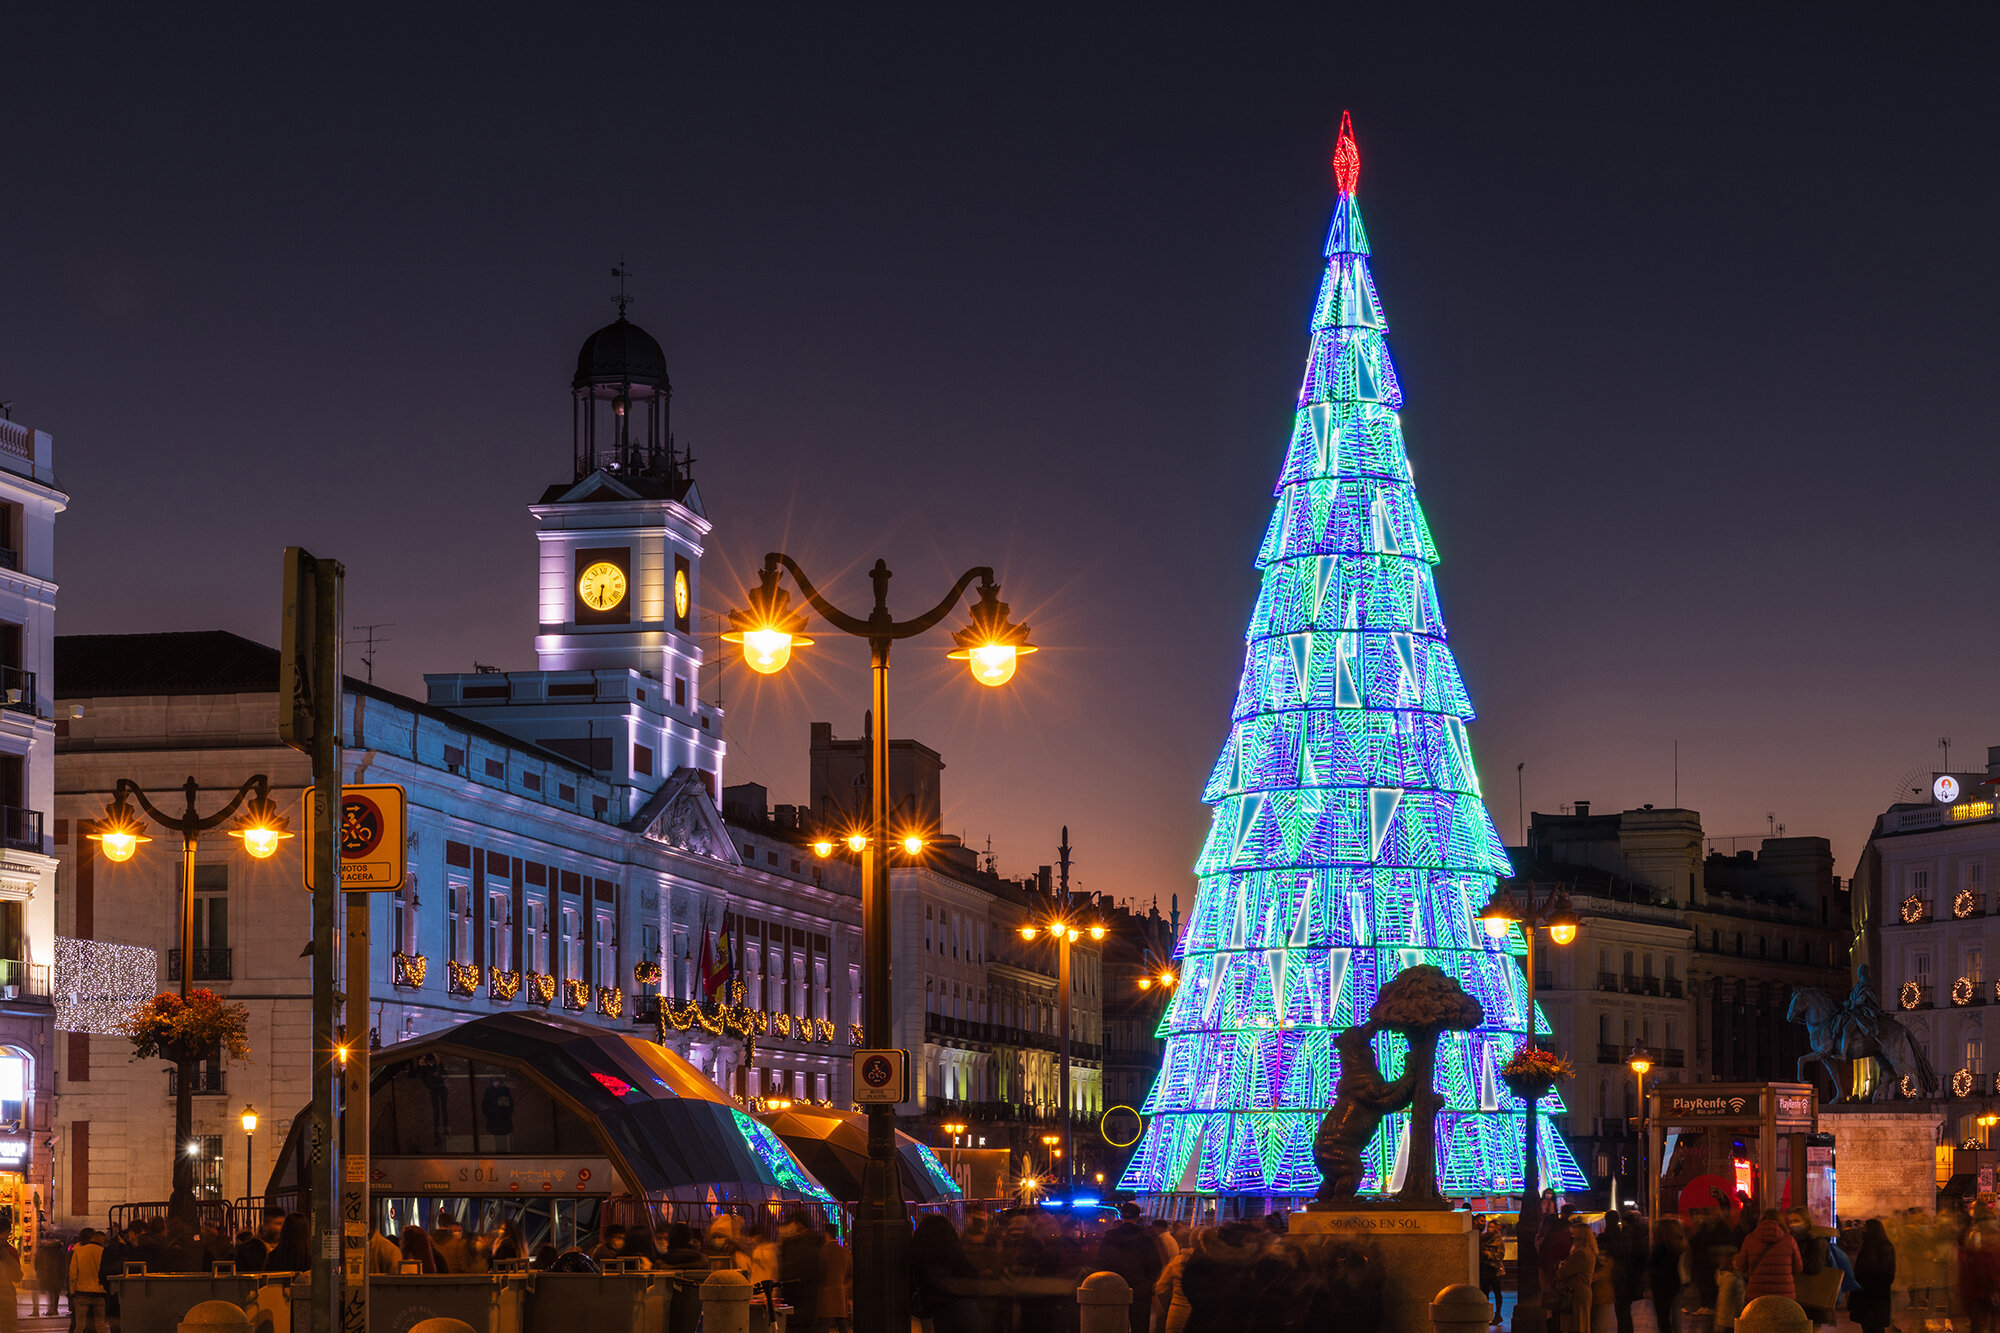 Crowds of people gather at the Puerta del Sol square in Madrid, Spain, with the traditional illuminated Christmas tree rising in its center.